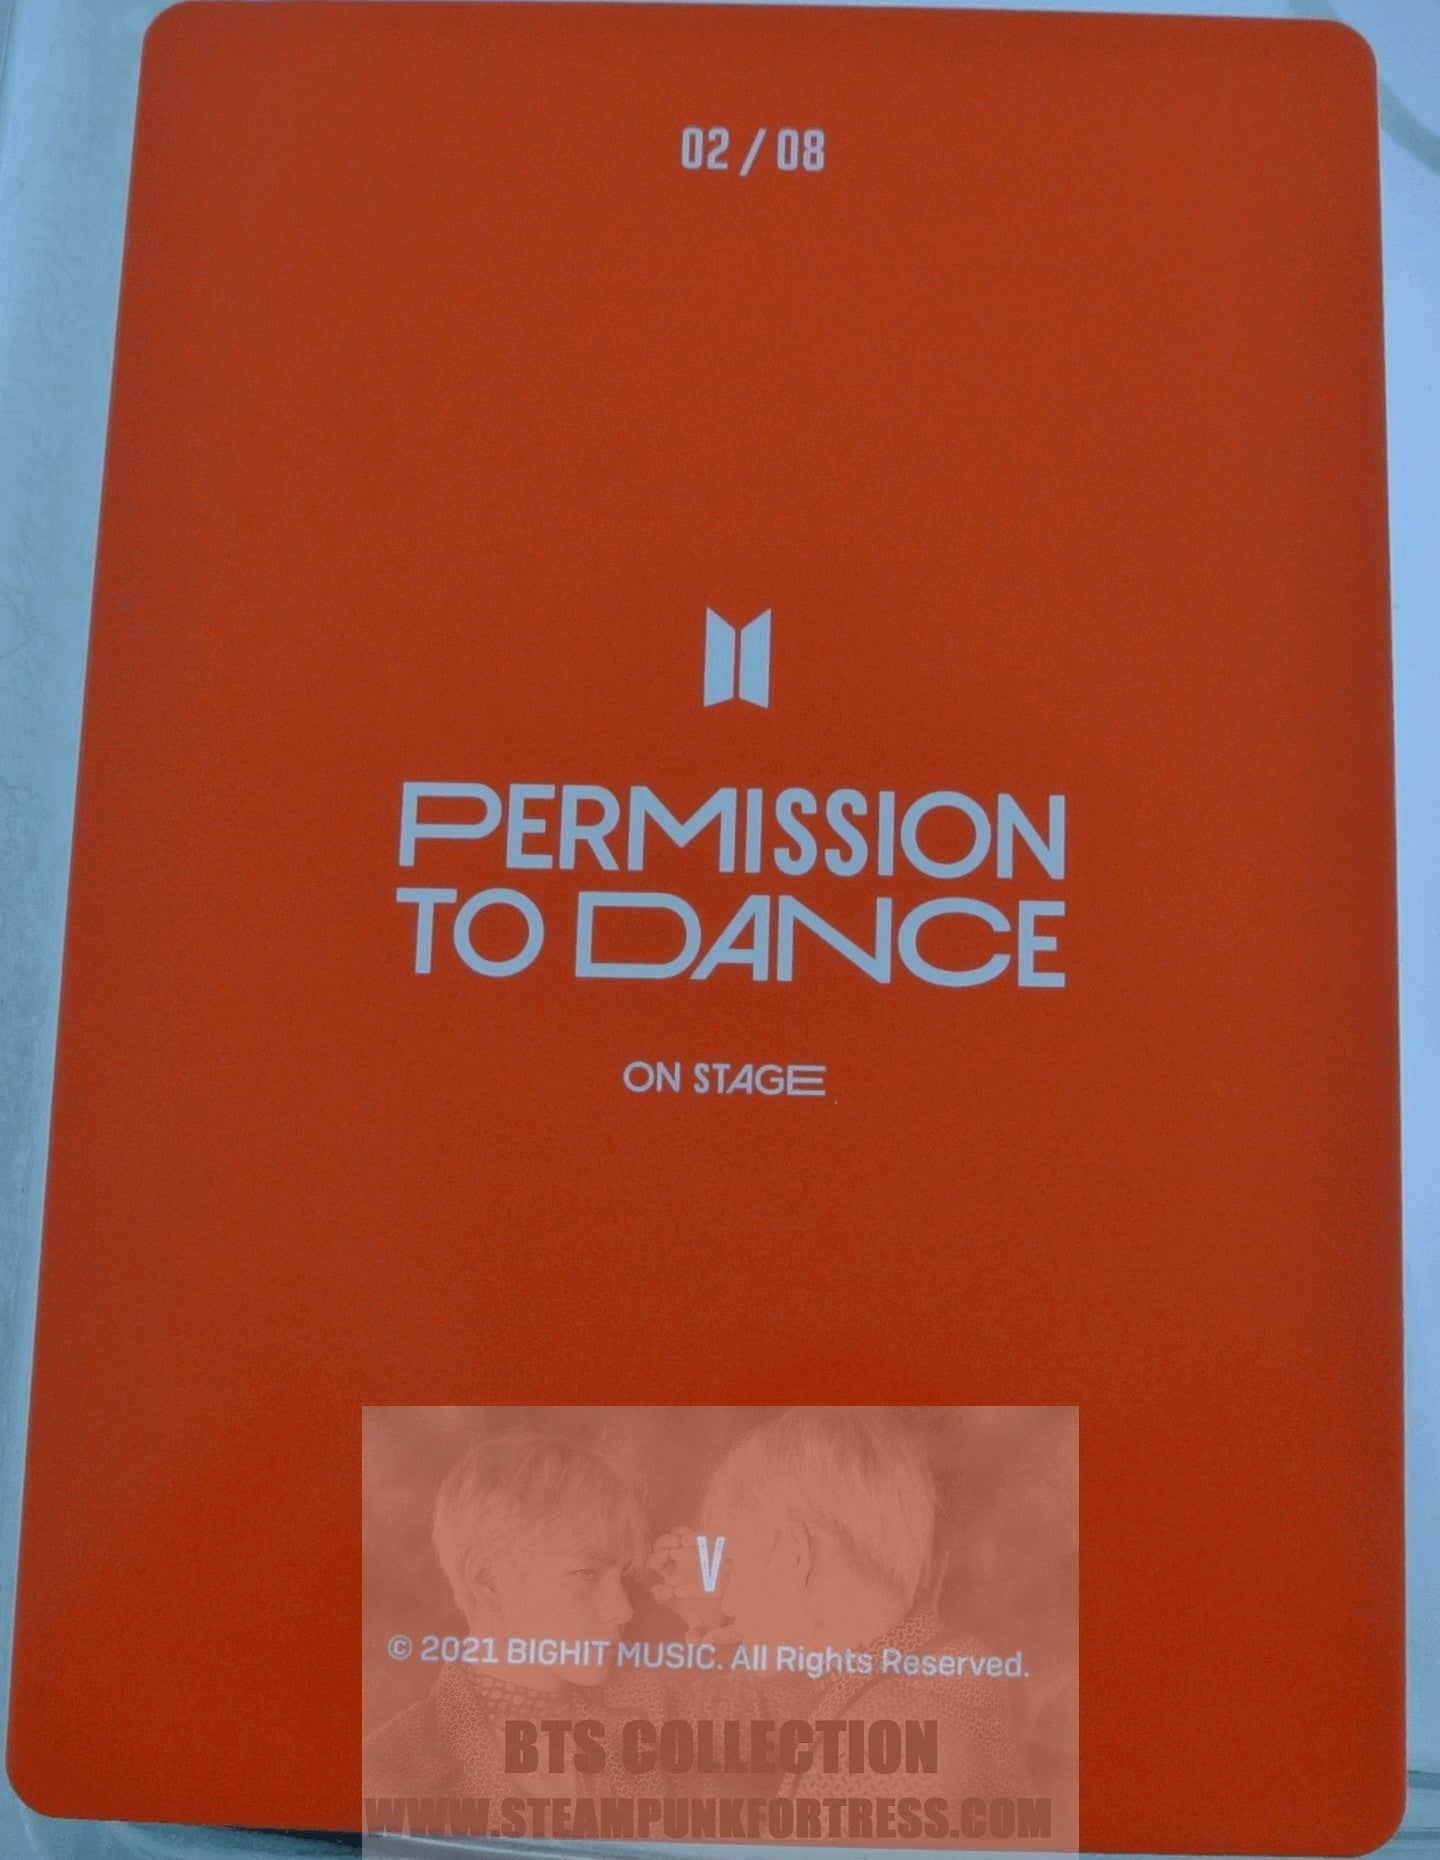 BTS V KIM TAEHYUNG TAE-HYUNG PTD 2021 PERMISSION TO DANCE ON STAGE #2 OF 8 PHOTOCARD PHOTO CARD NEW OFFICIAL MERCHANDISE